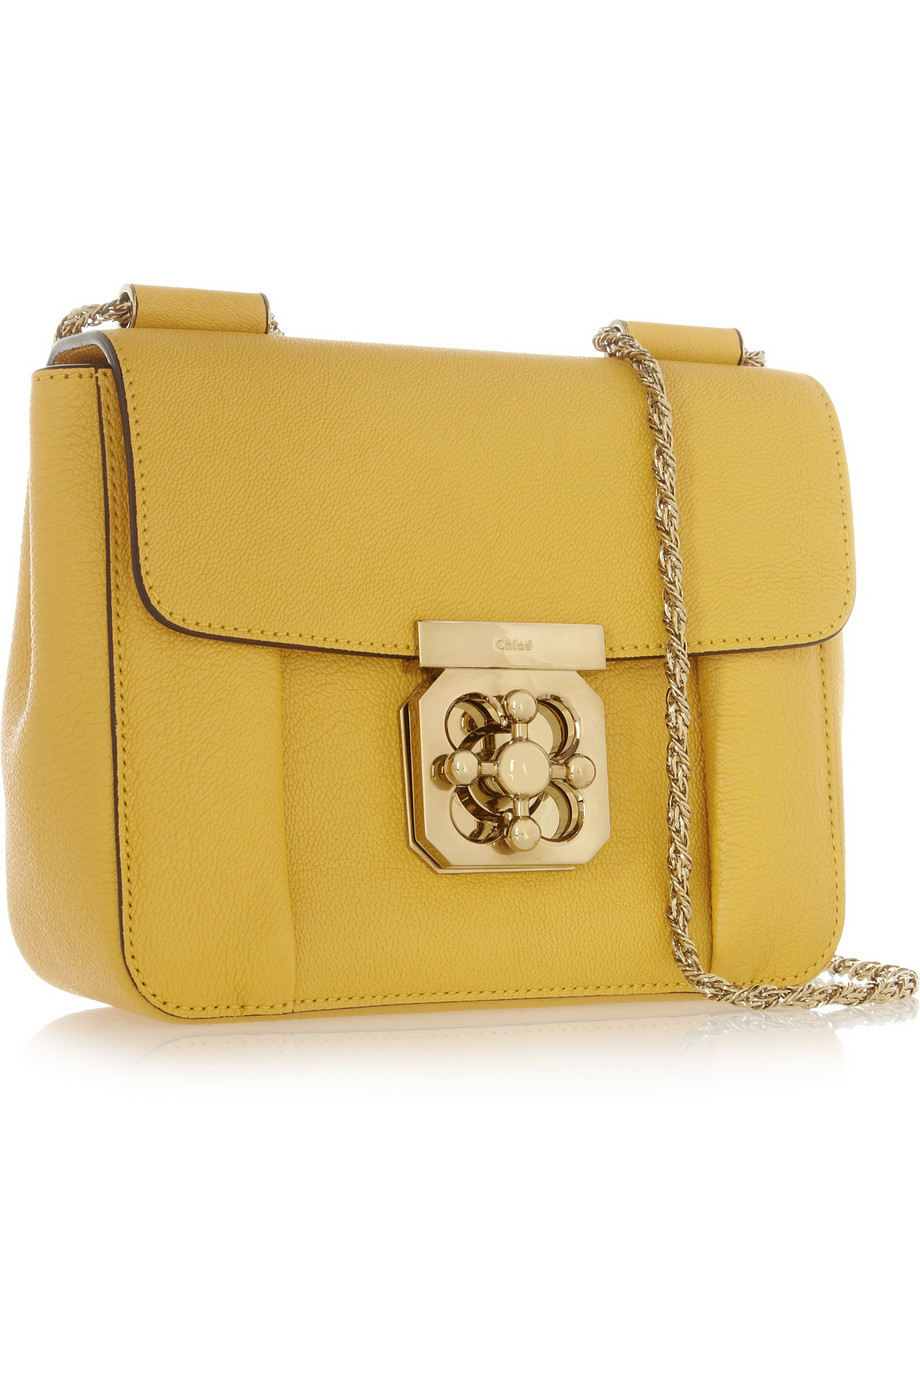 Chlo Elsie Small Texturedleather Shoulder Bag in Yellow | Lyst